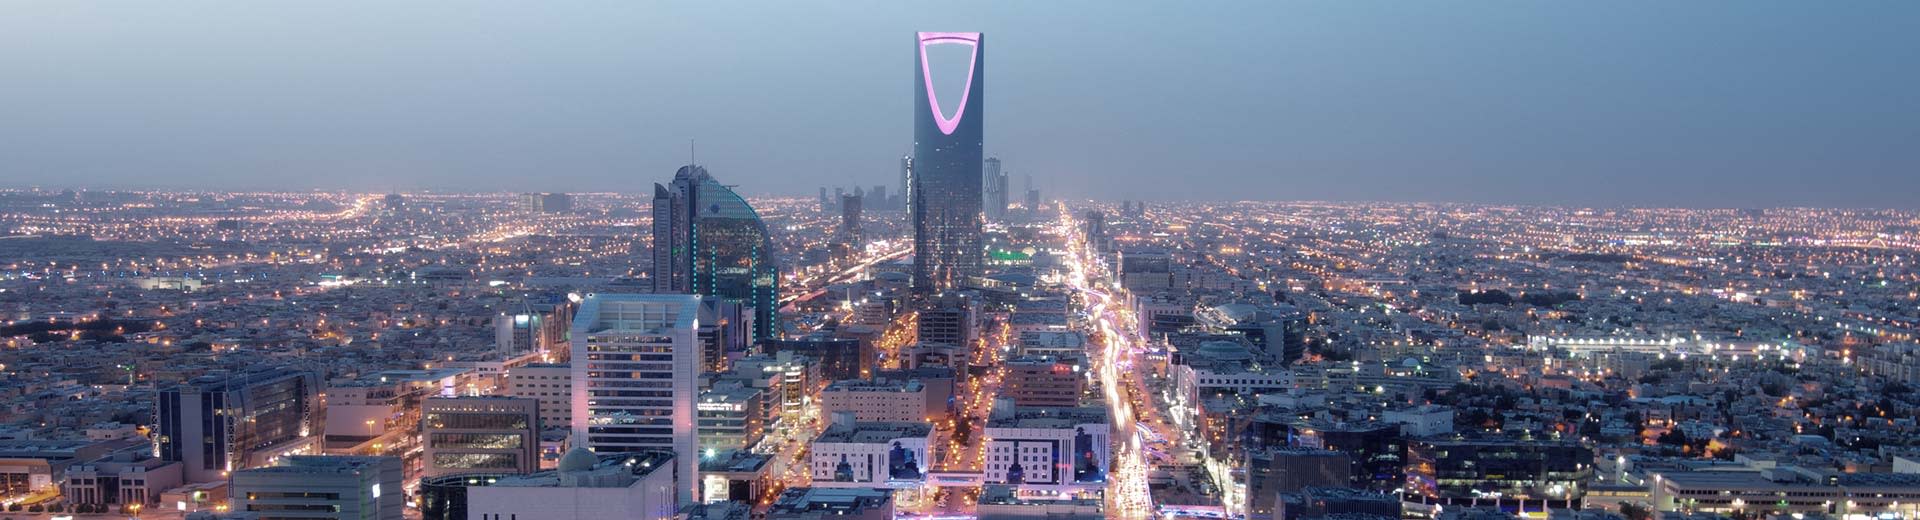 The sprawling grid system of Riyadh dominates the view, with the famous bottle opener skyscraper perched iconically.